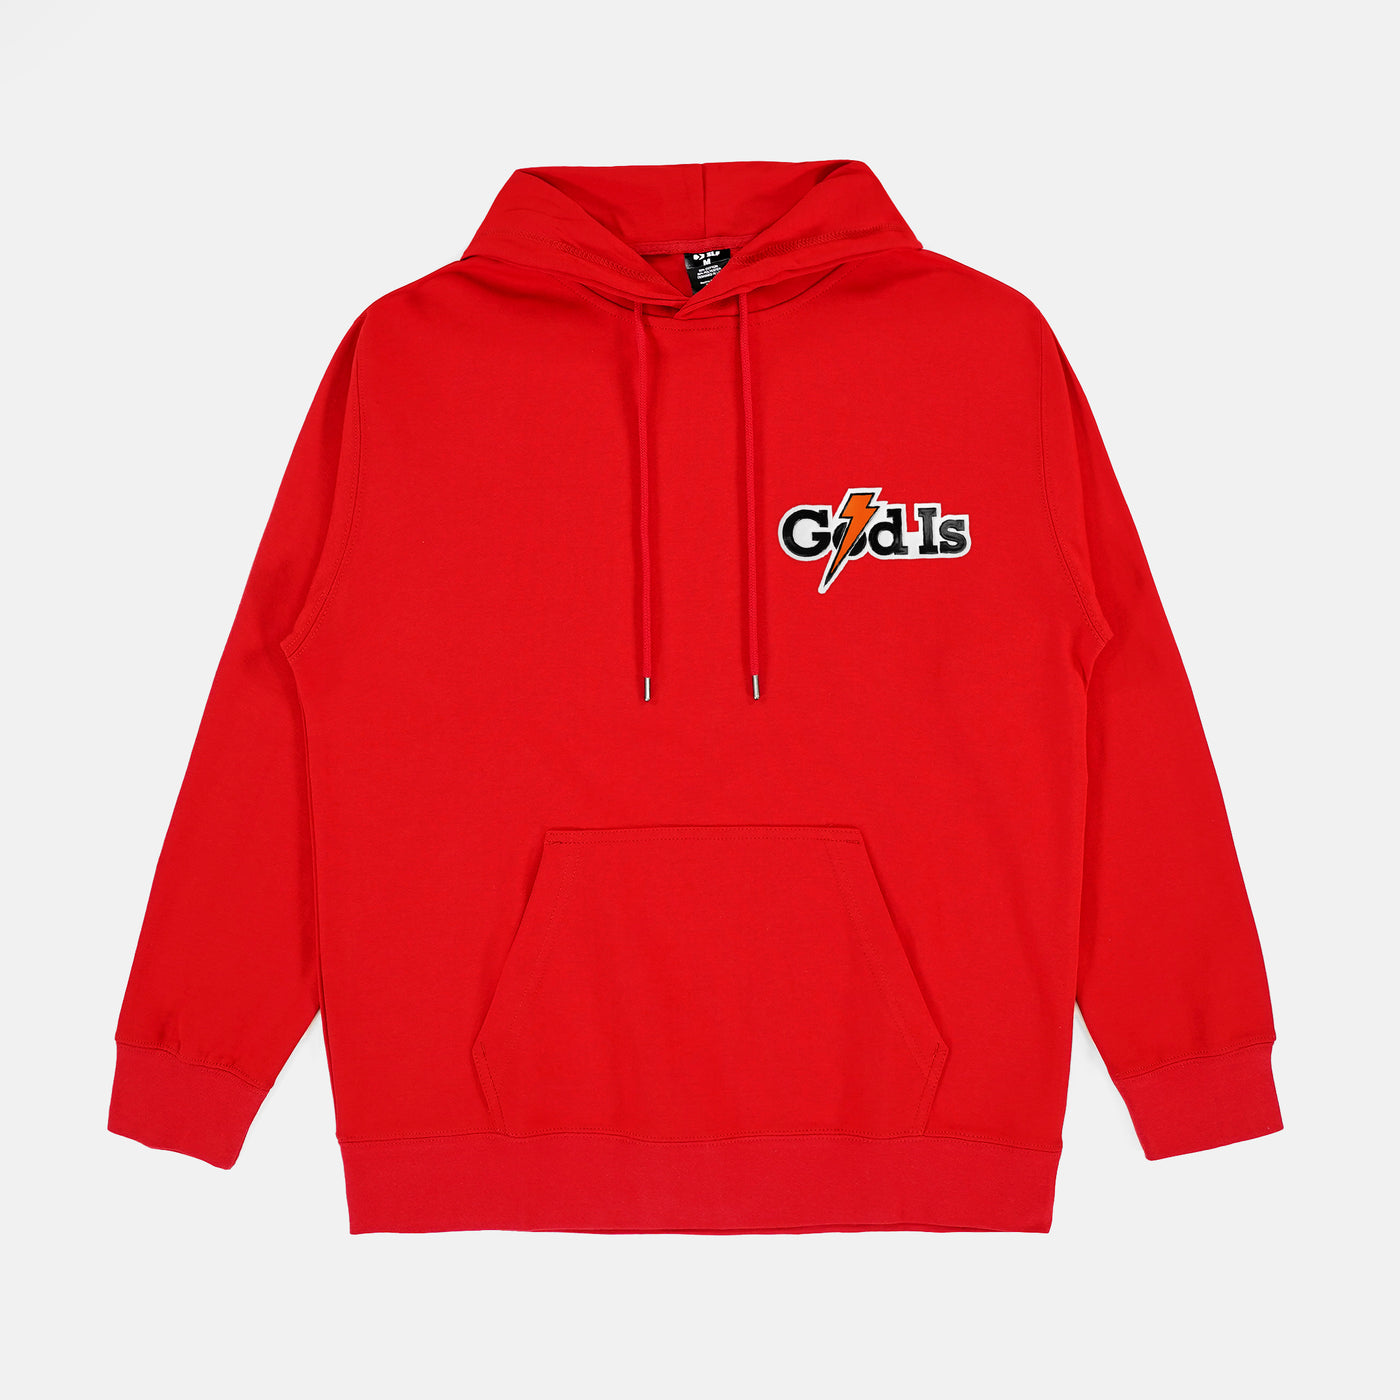 God Is Patch Hoodie